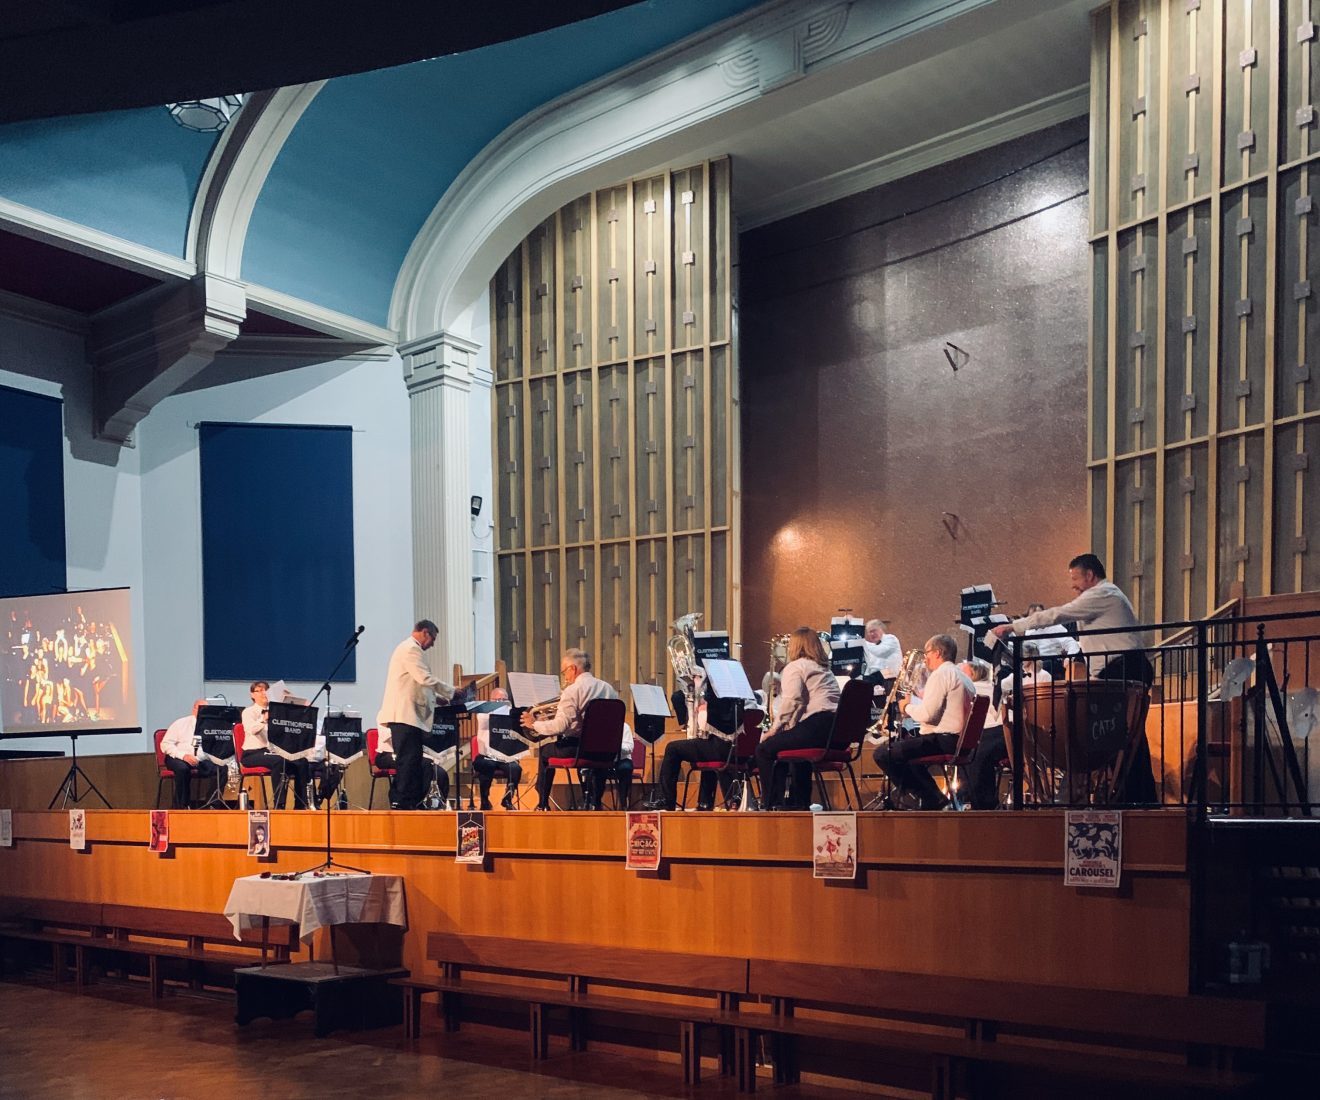 Cleethorpes Band open the return of music and theatre to the Grimsby Central Hall